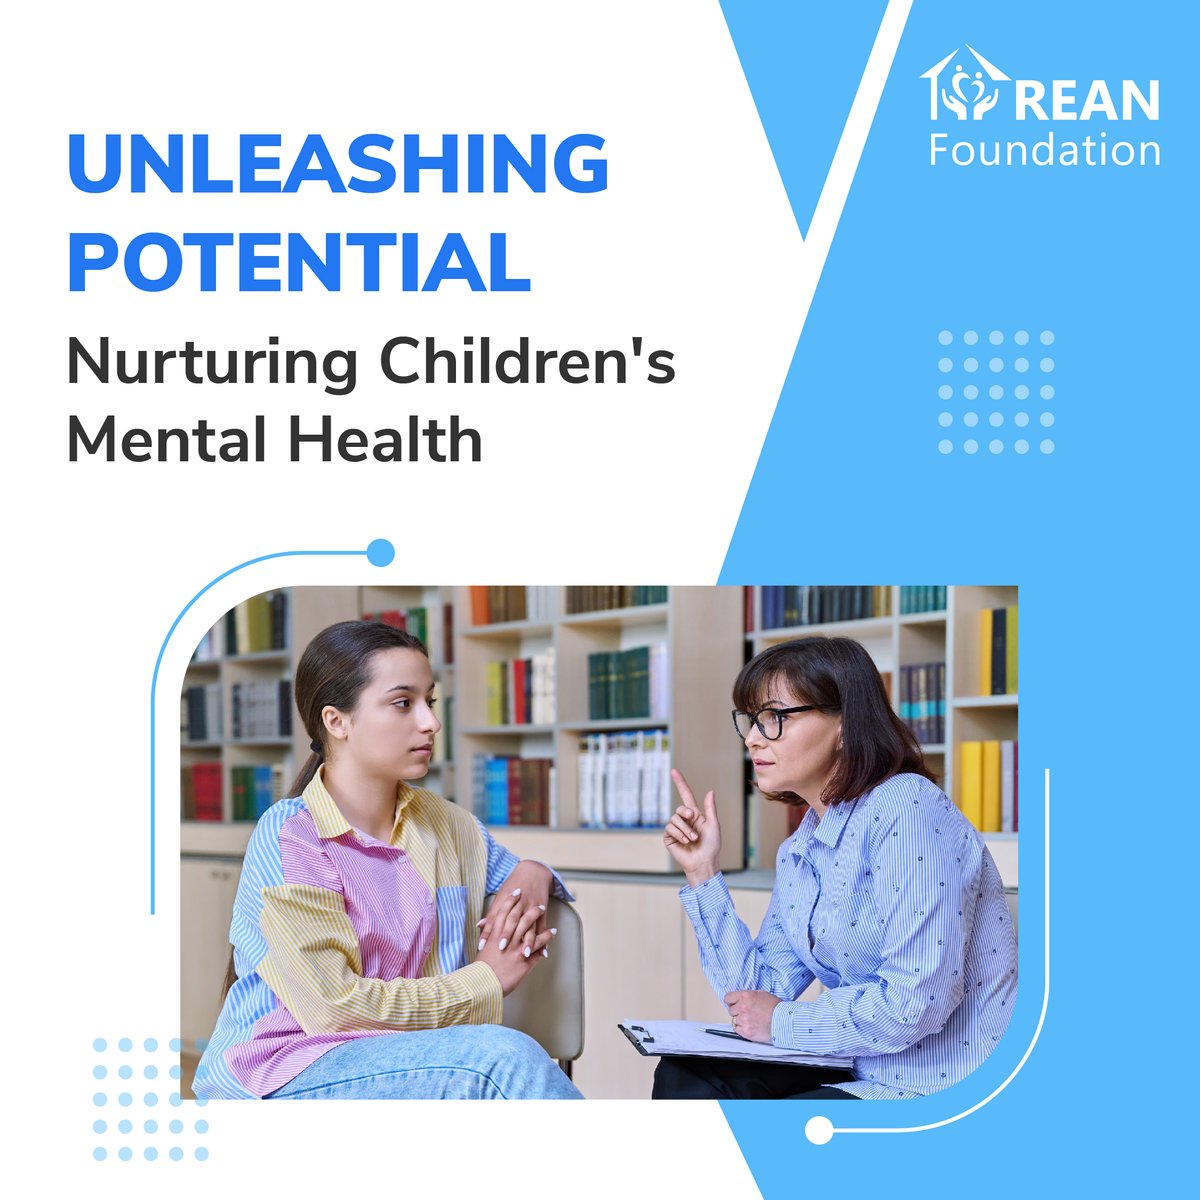 Identifying children's mental health struggles early is important to determine effective interventions. 
Visit our blog for more information and details - reanfoundation.org/navigating-chi…

#REANFoundation #REAN #mentalhealth #childrenmentalhealth #ChildhoodChallenges